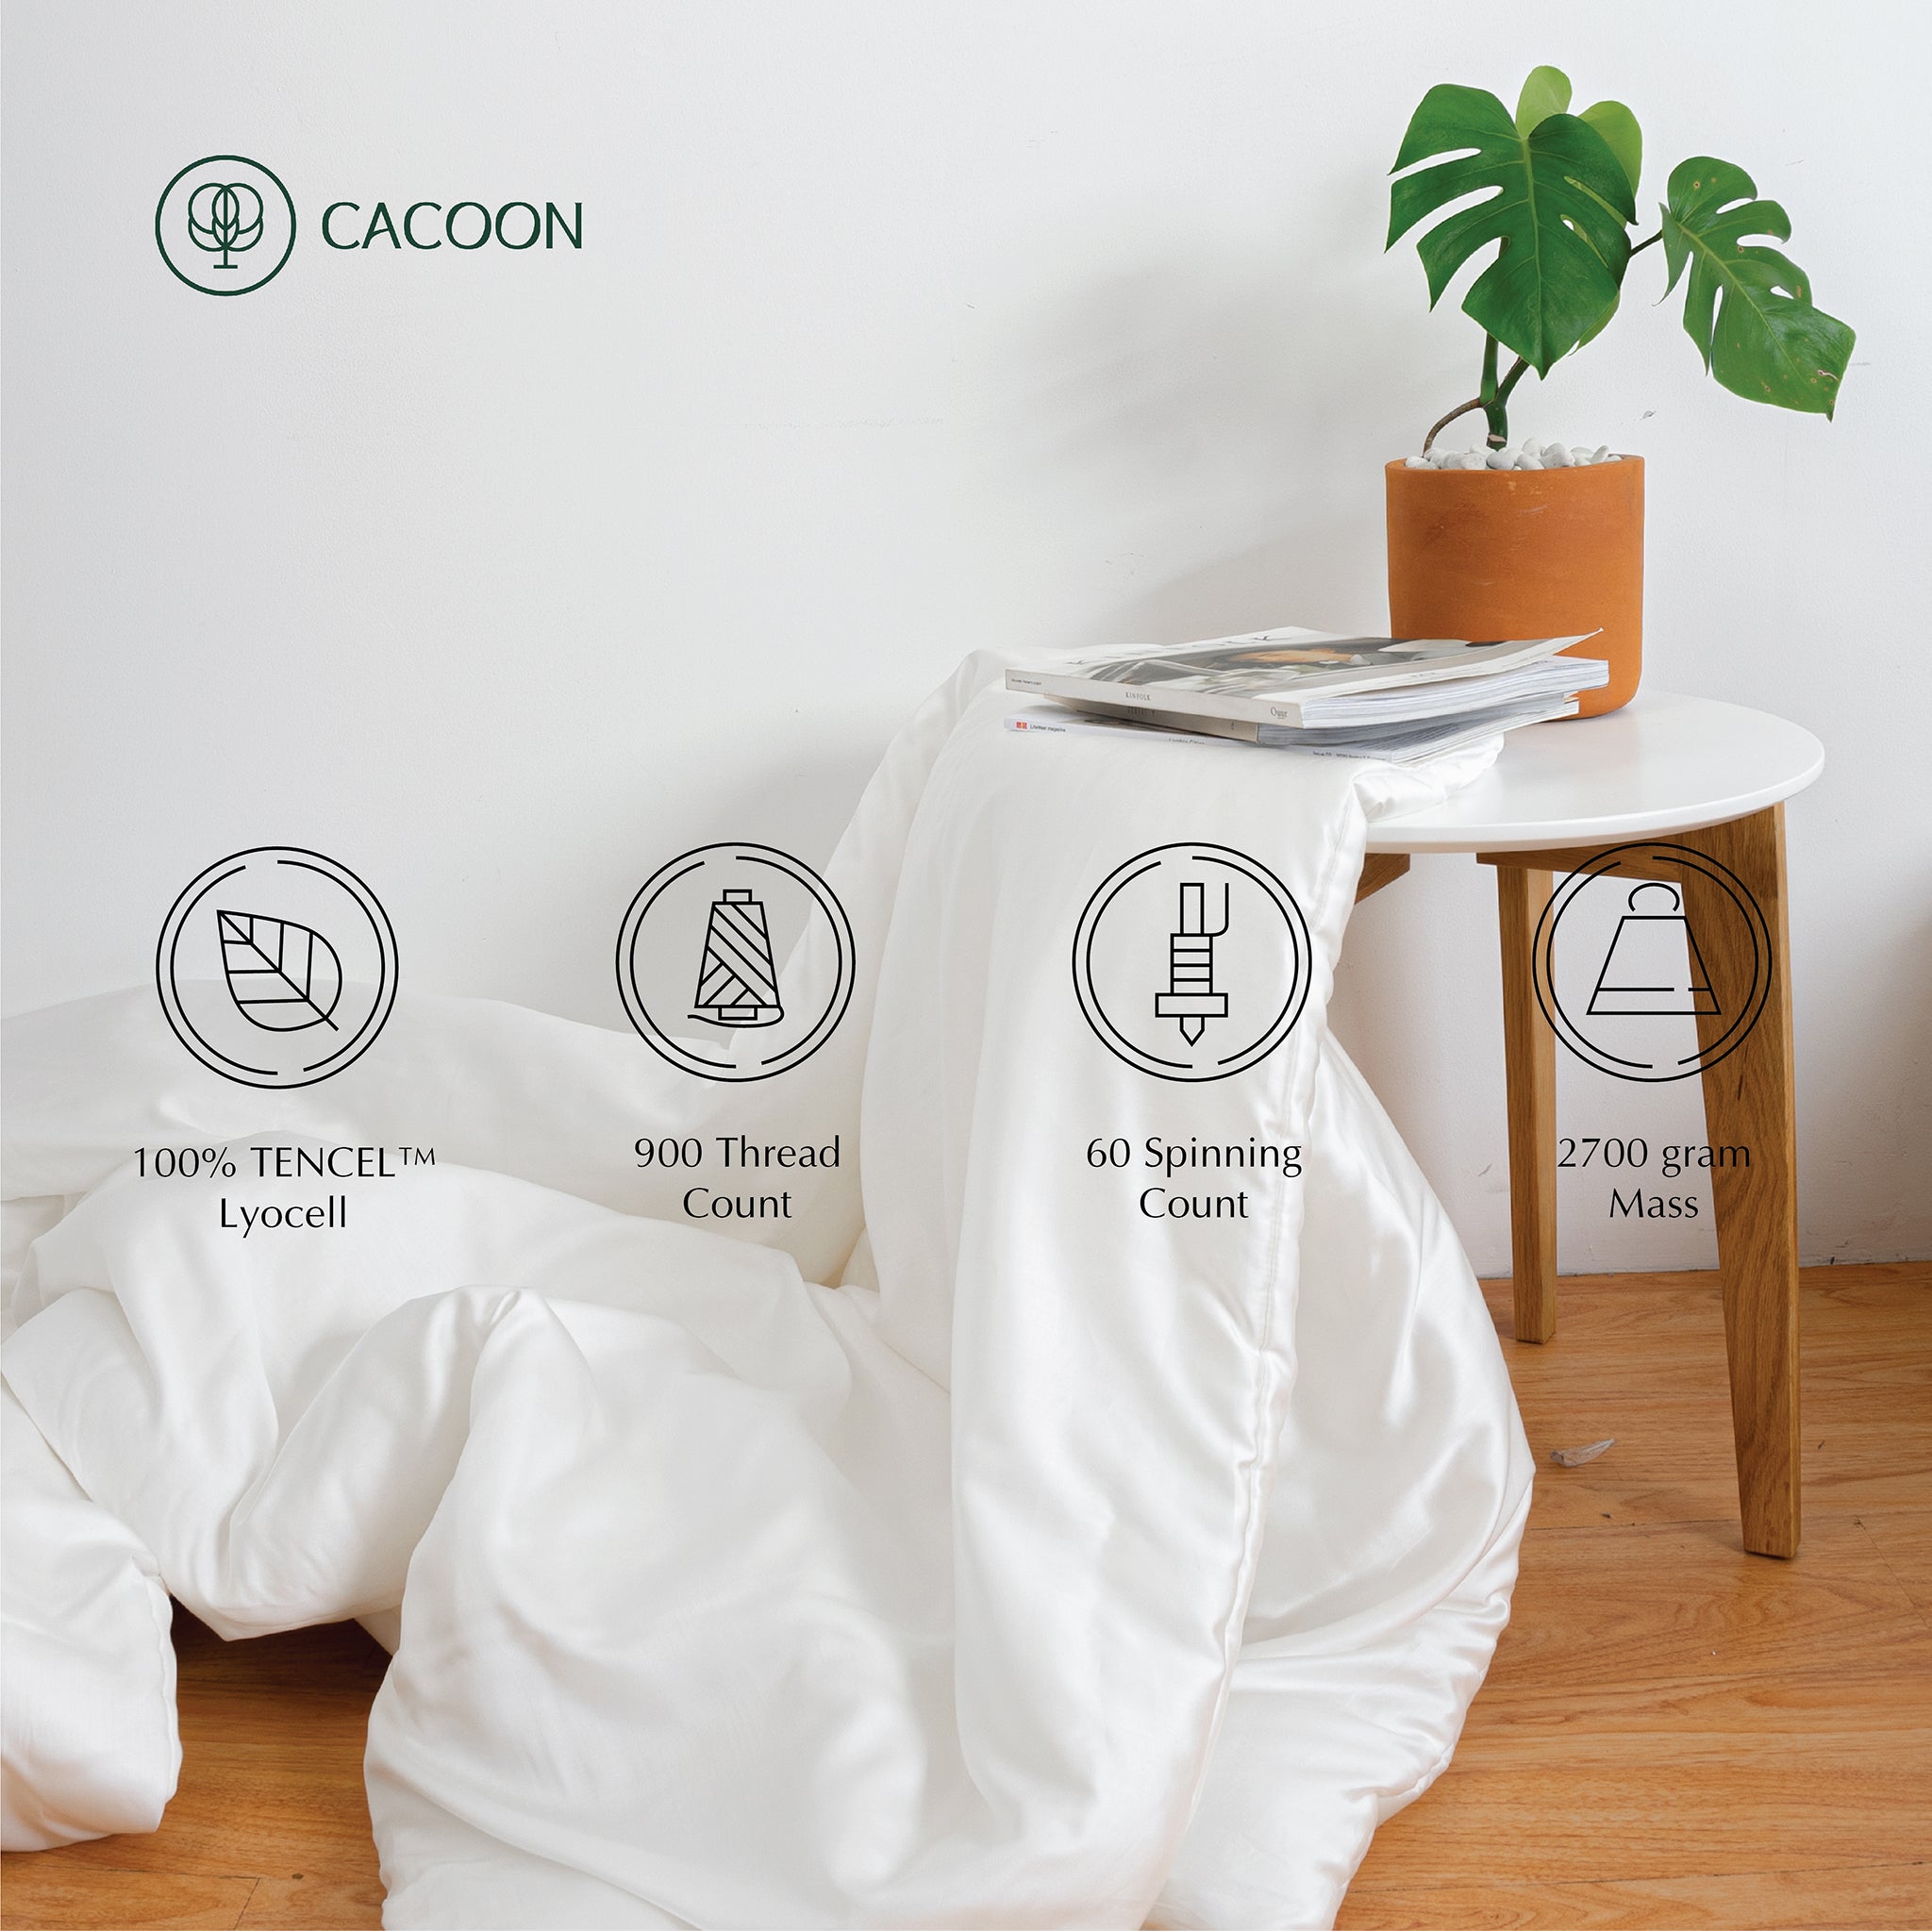 Dolce Vita TENCEL™ Lyocell – Cacoon Home